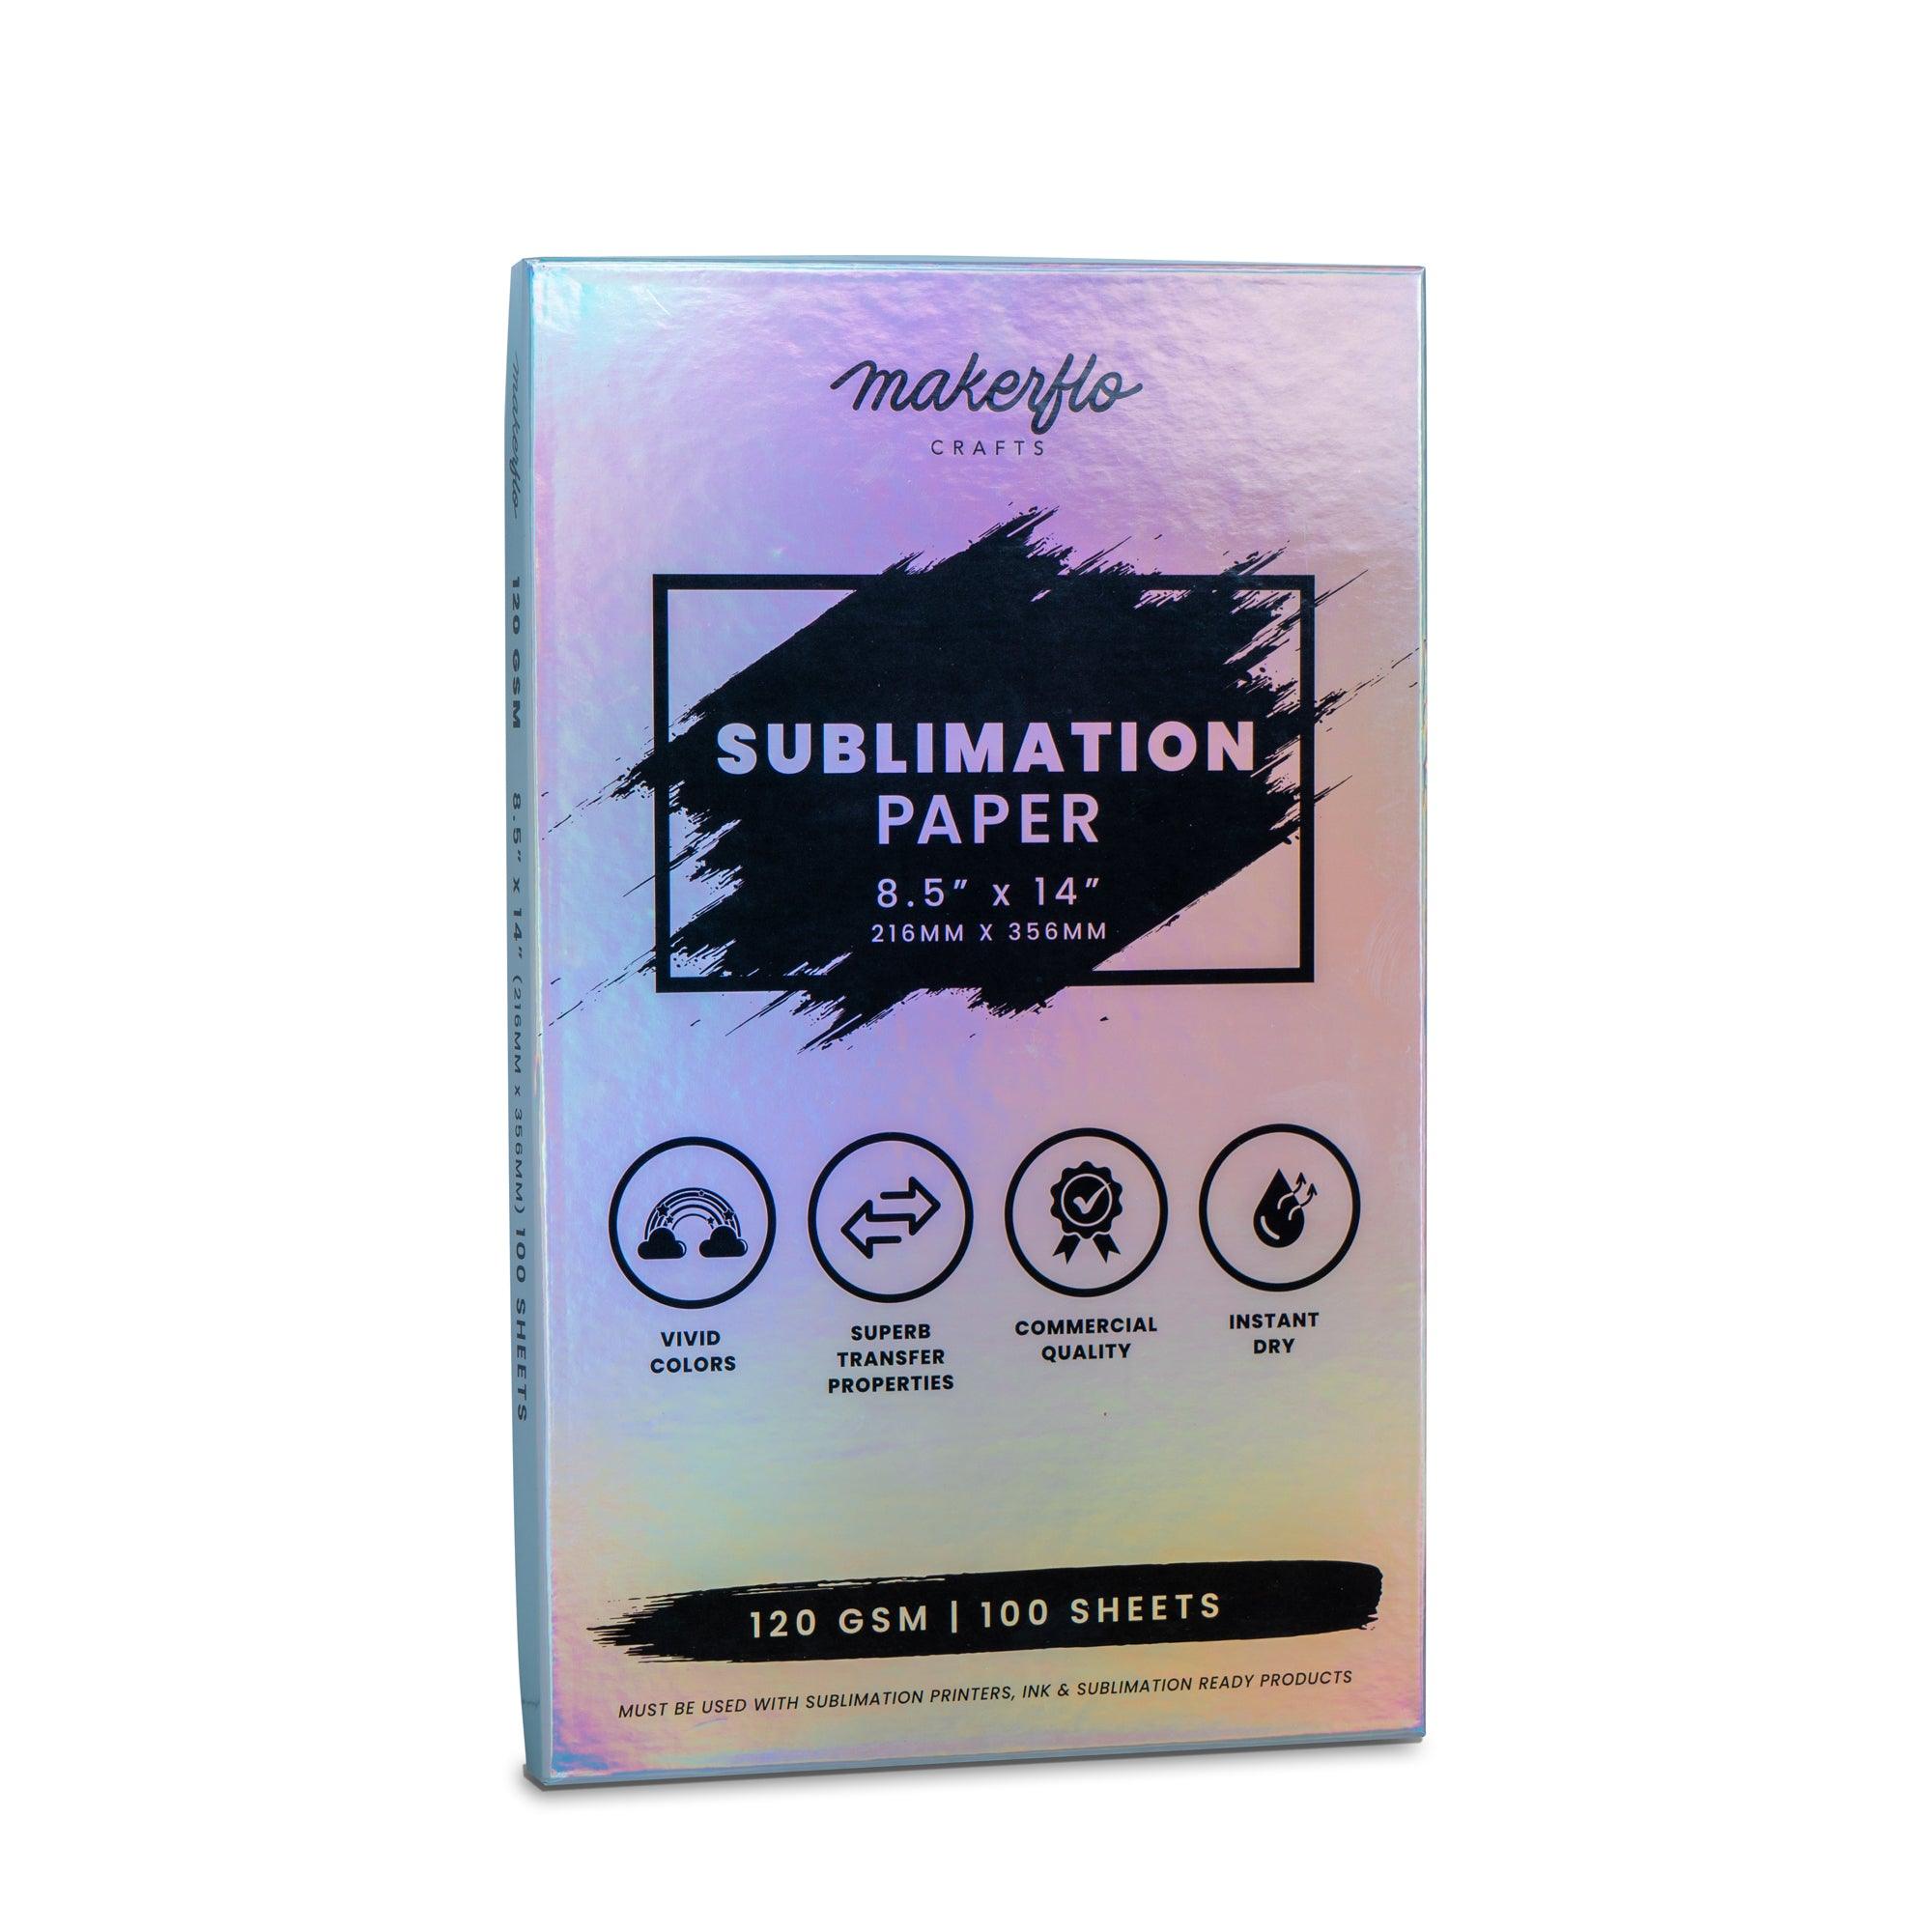 Image Right Sublimation Paper, 8.5 x 14 - 100 Sheets